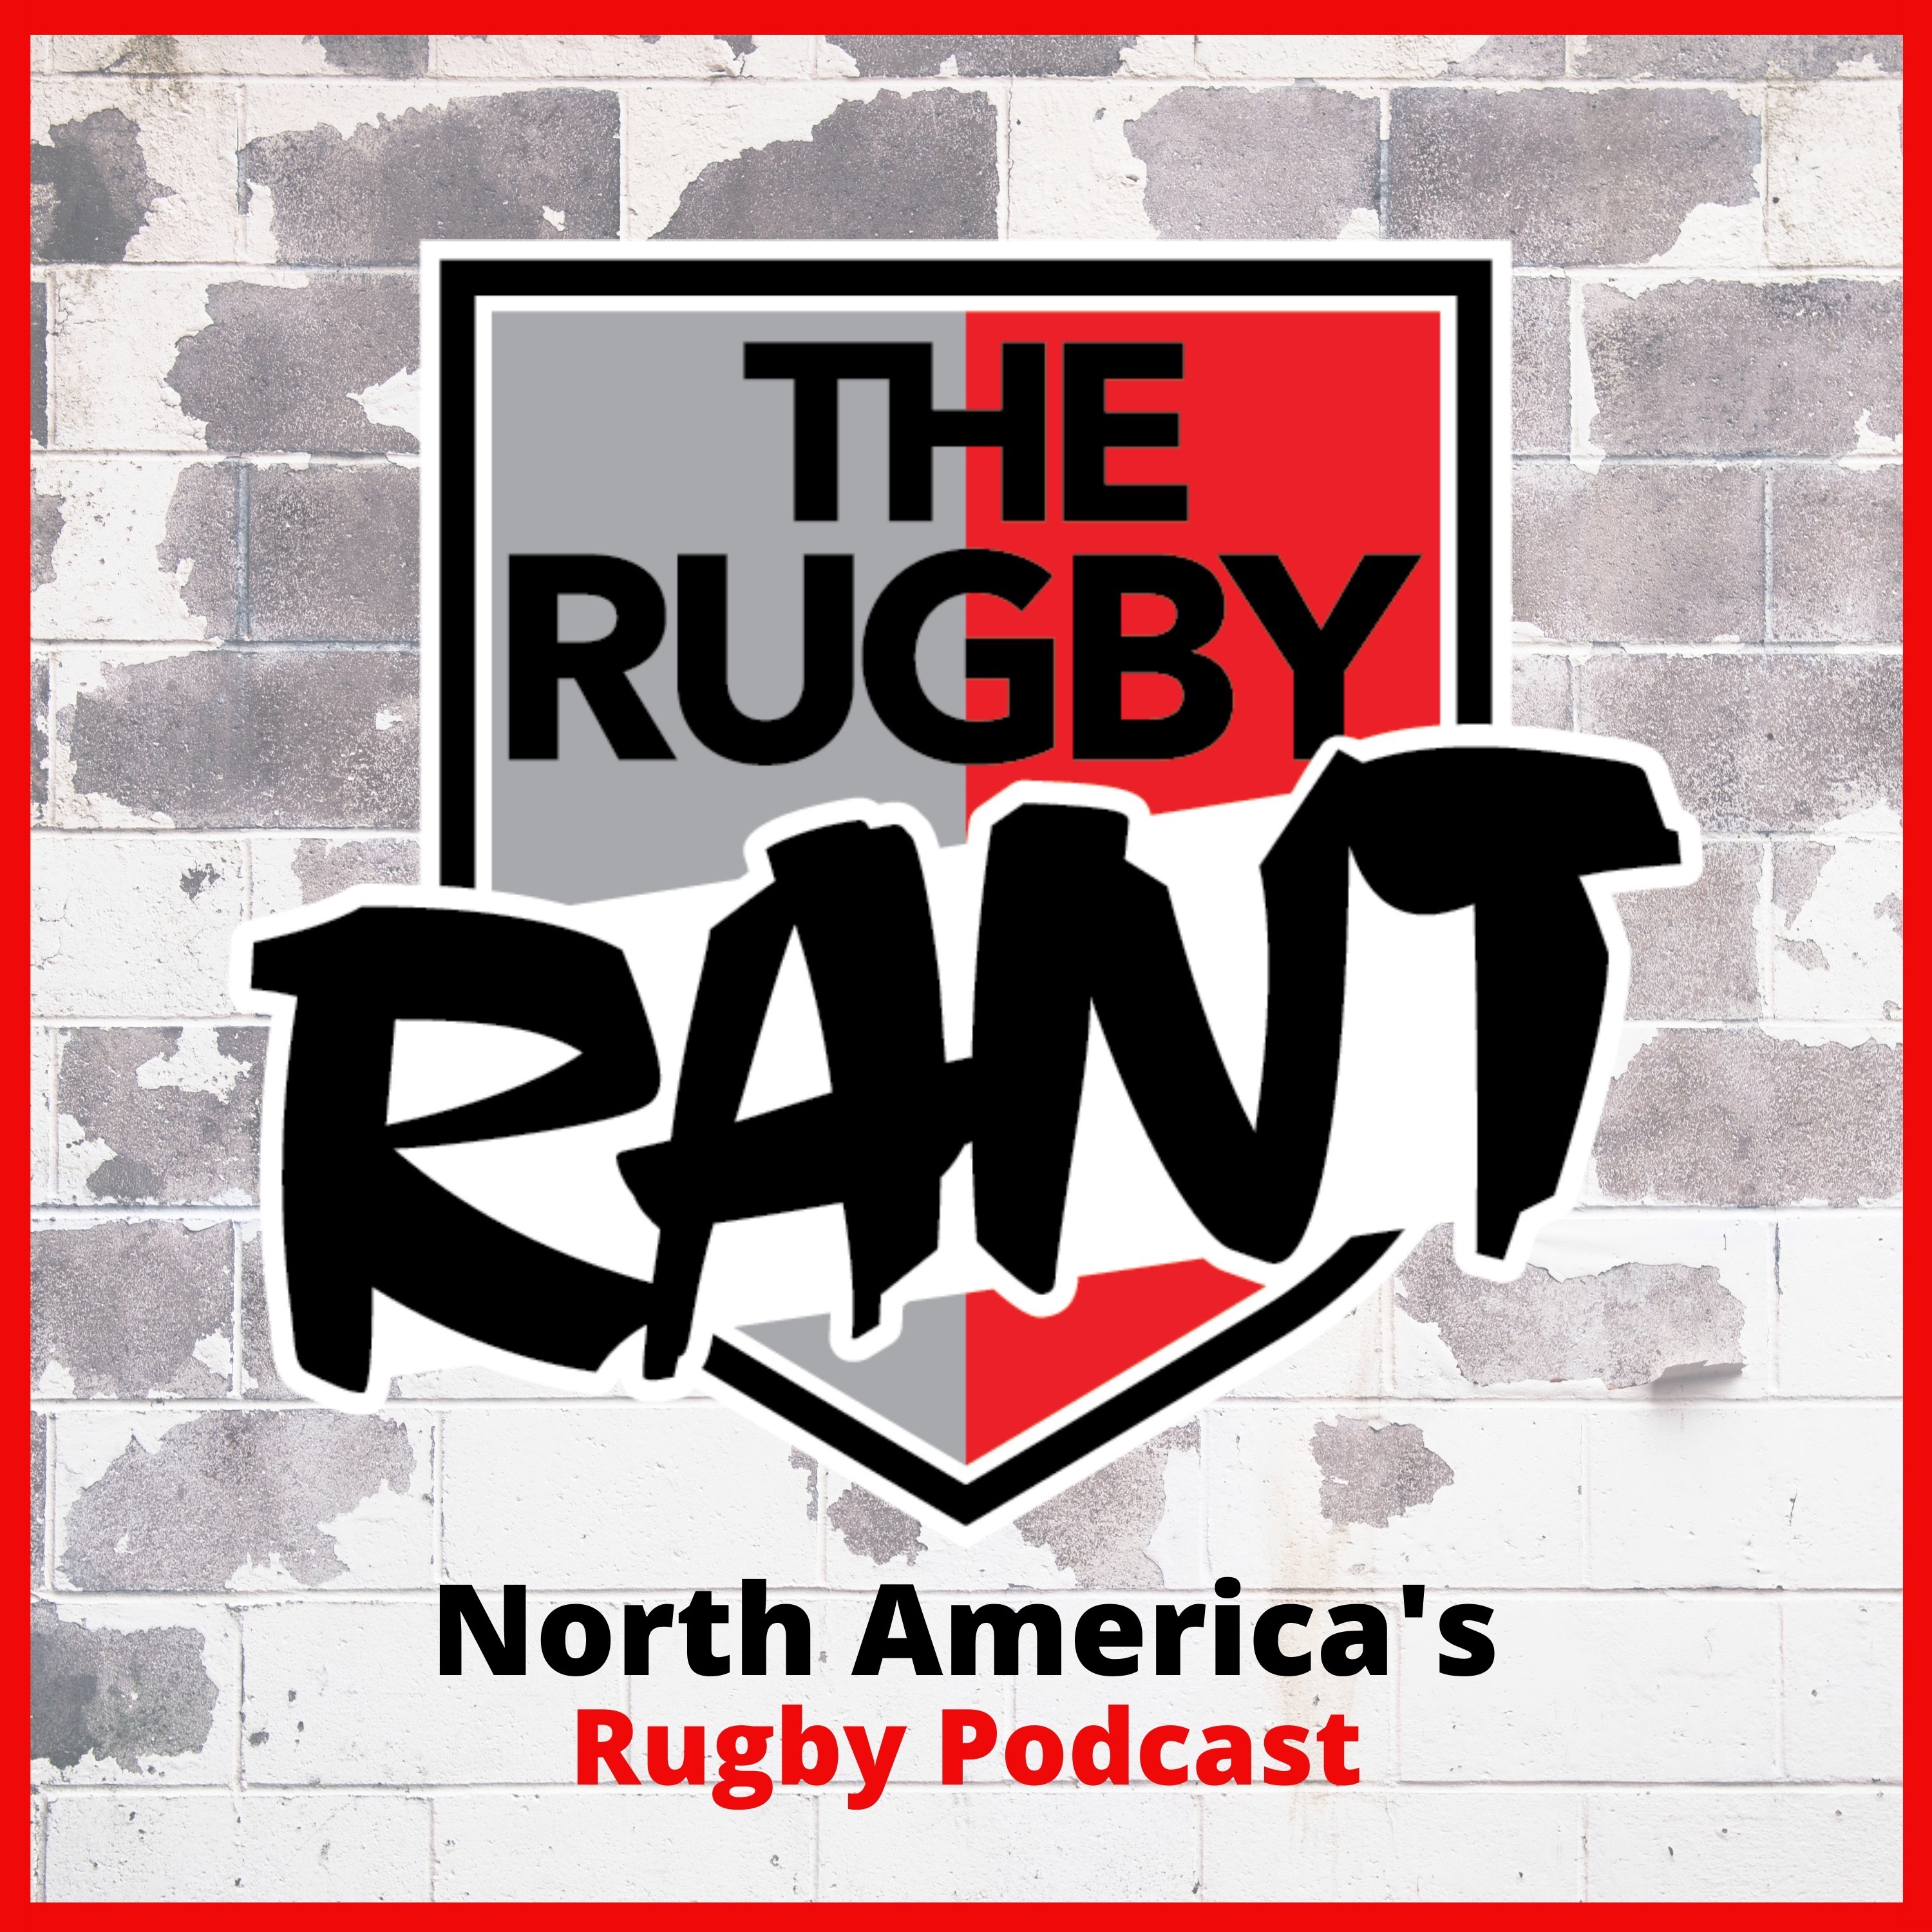 The Rugby Rant - Run, Pass or Kick with Dan Lyle